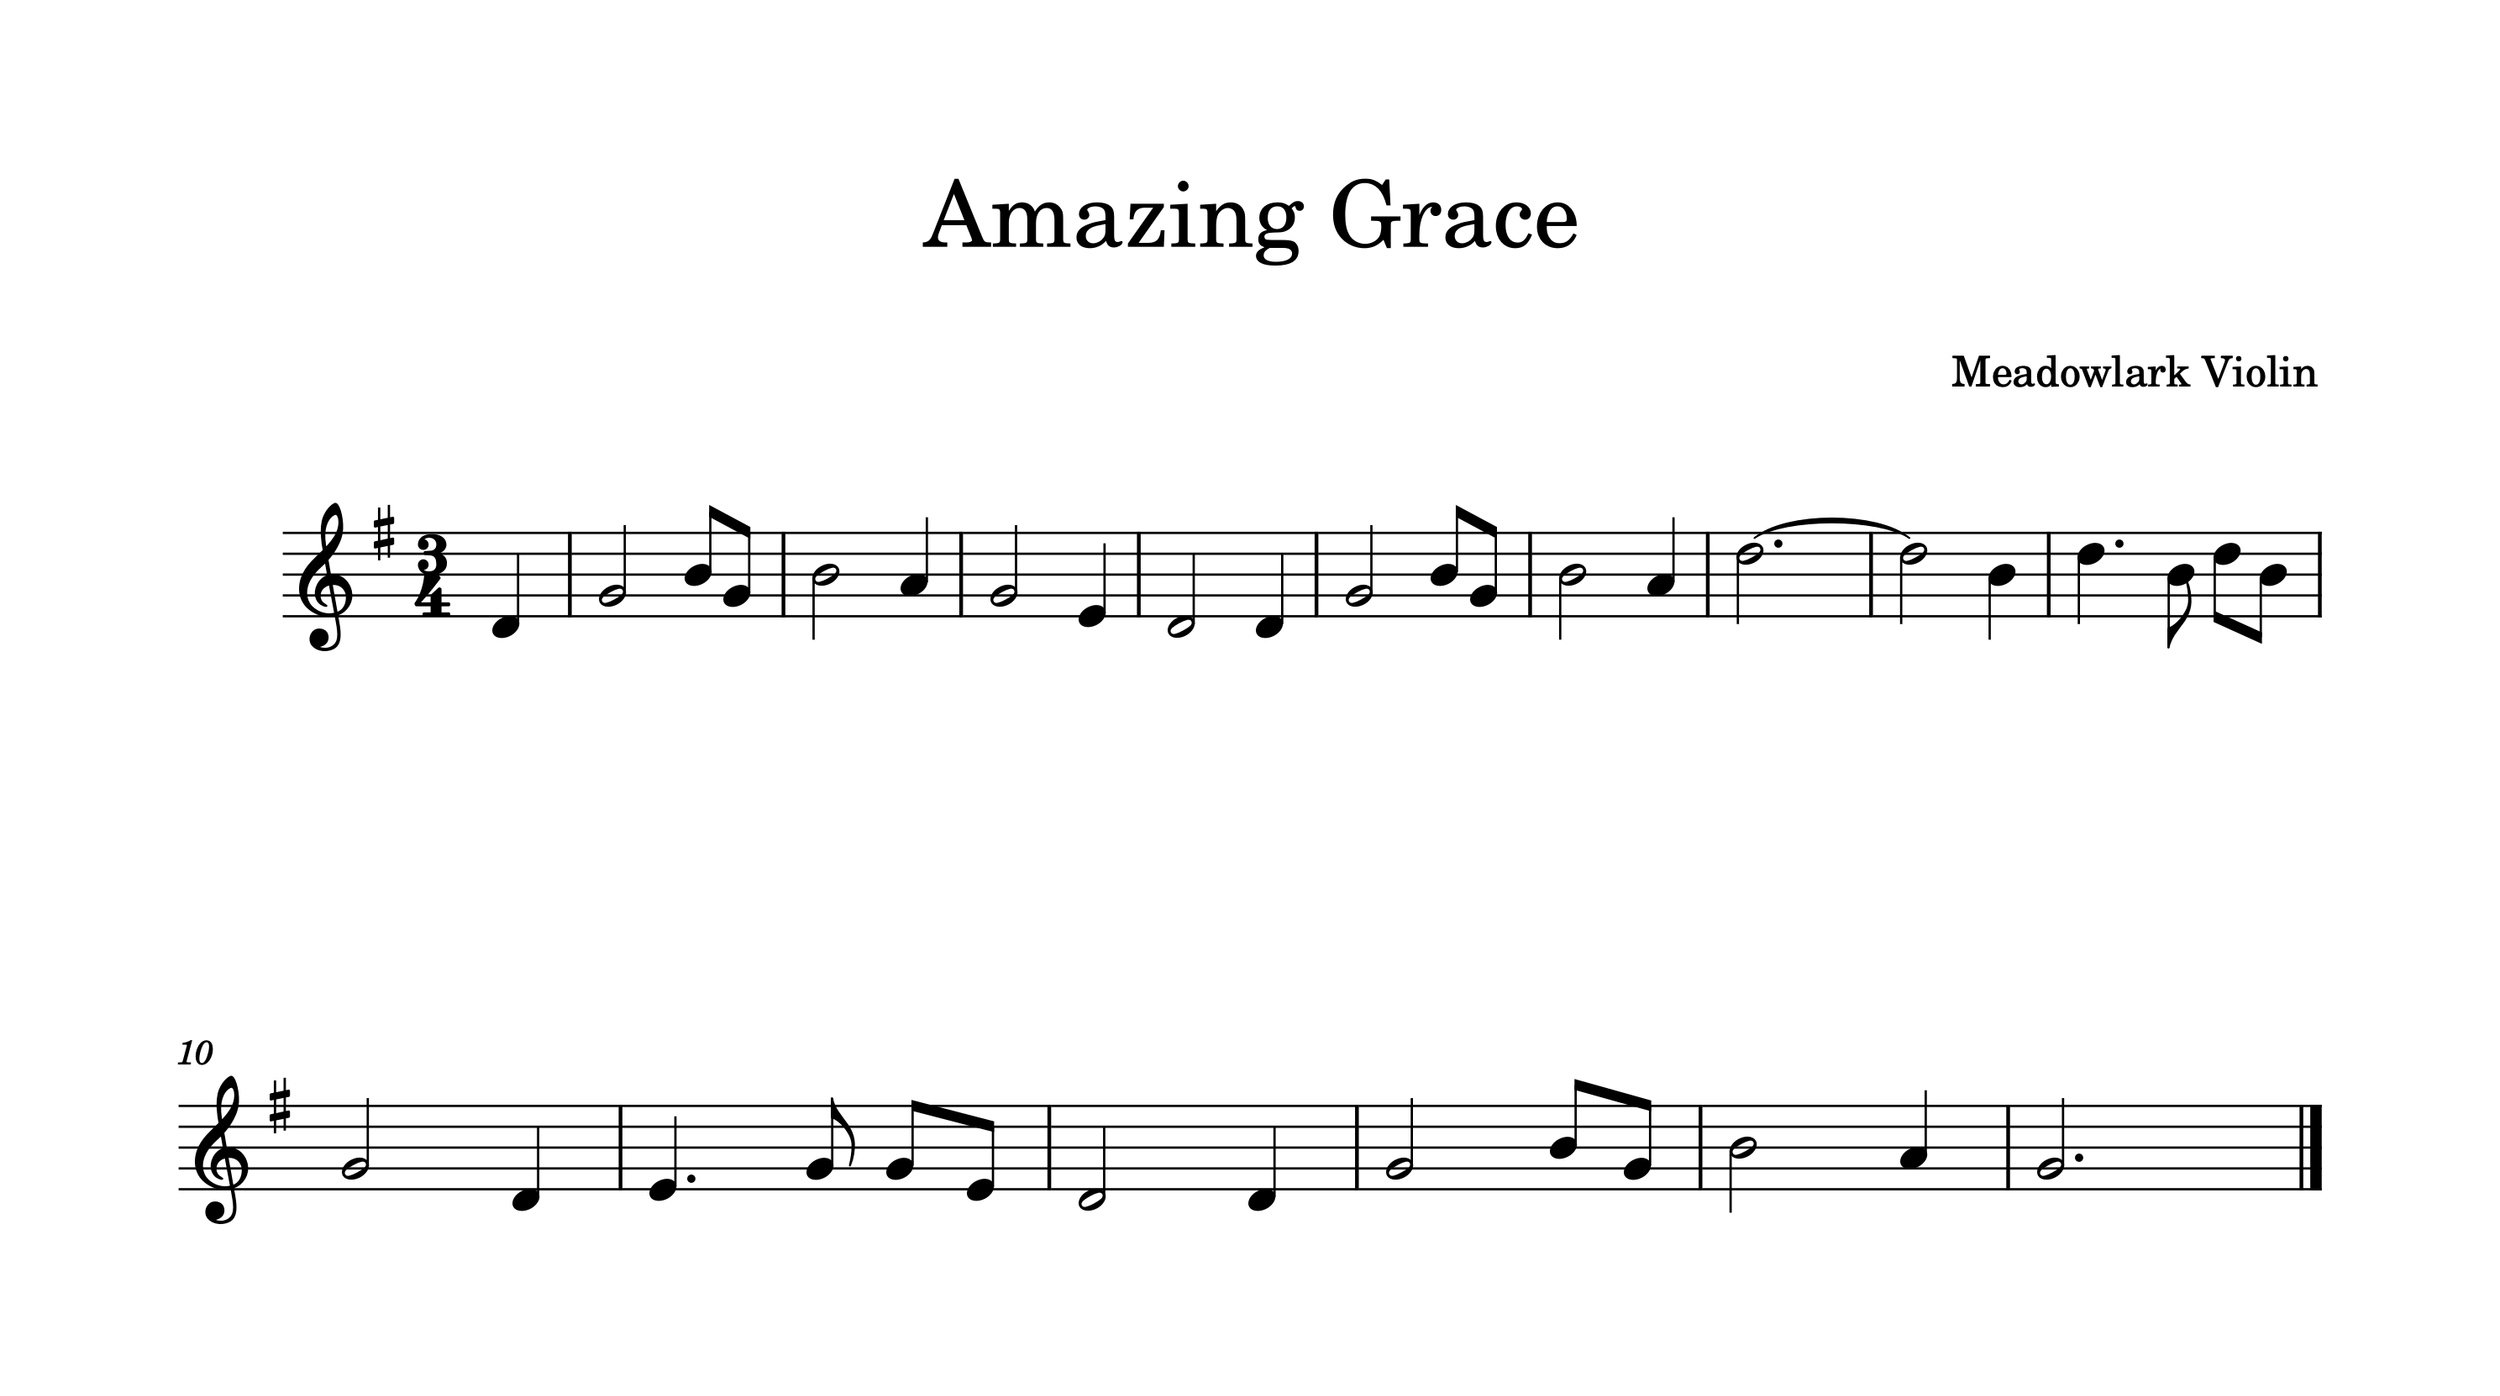 Amazing Grace (how to play) - Easy Beginners Song - Violin Tutorial 